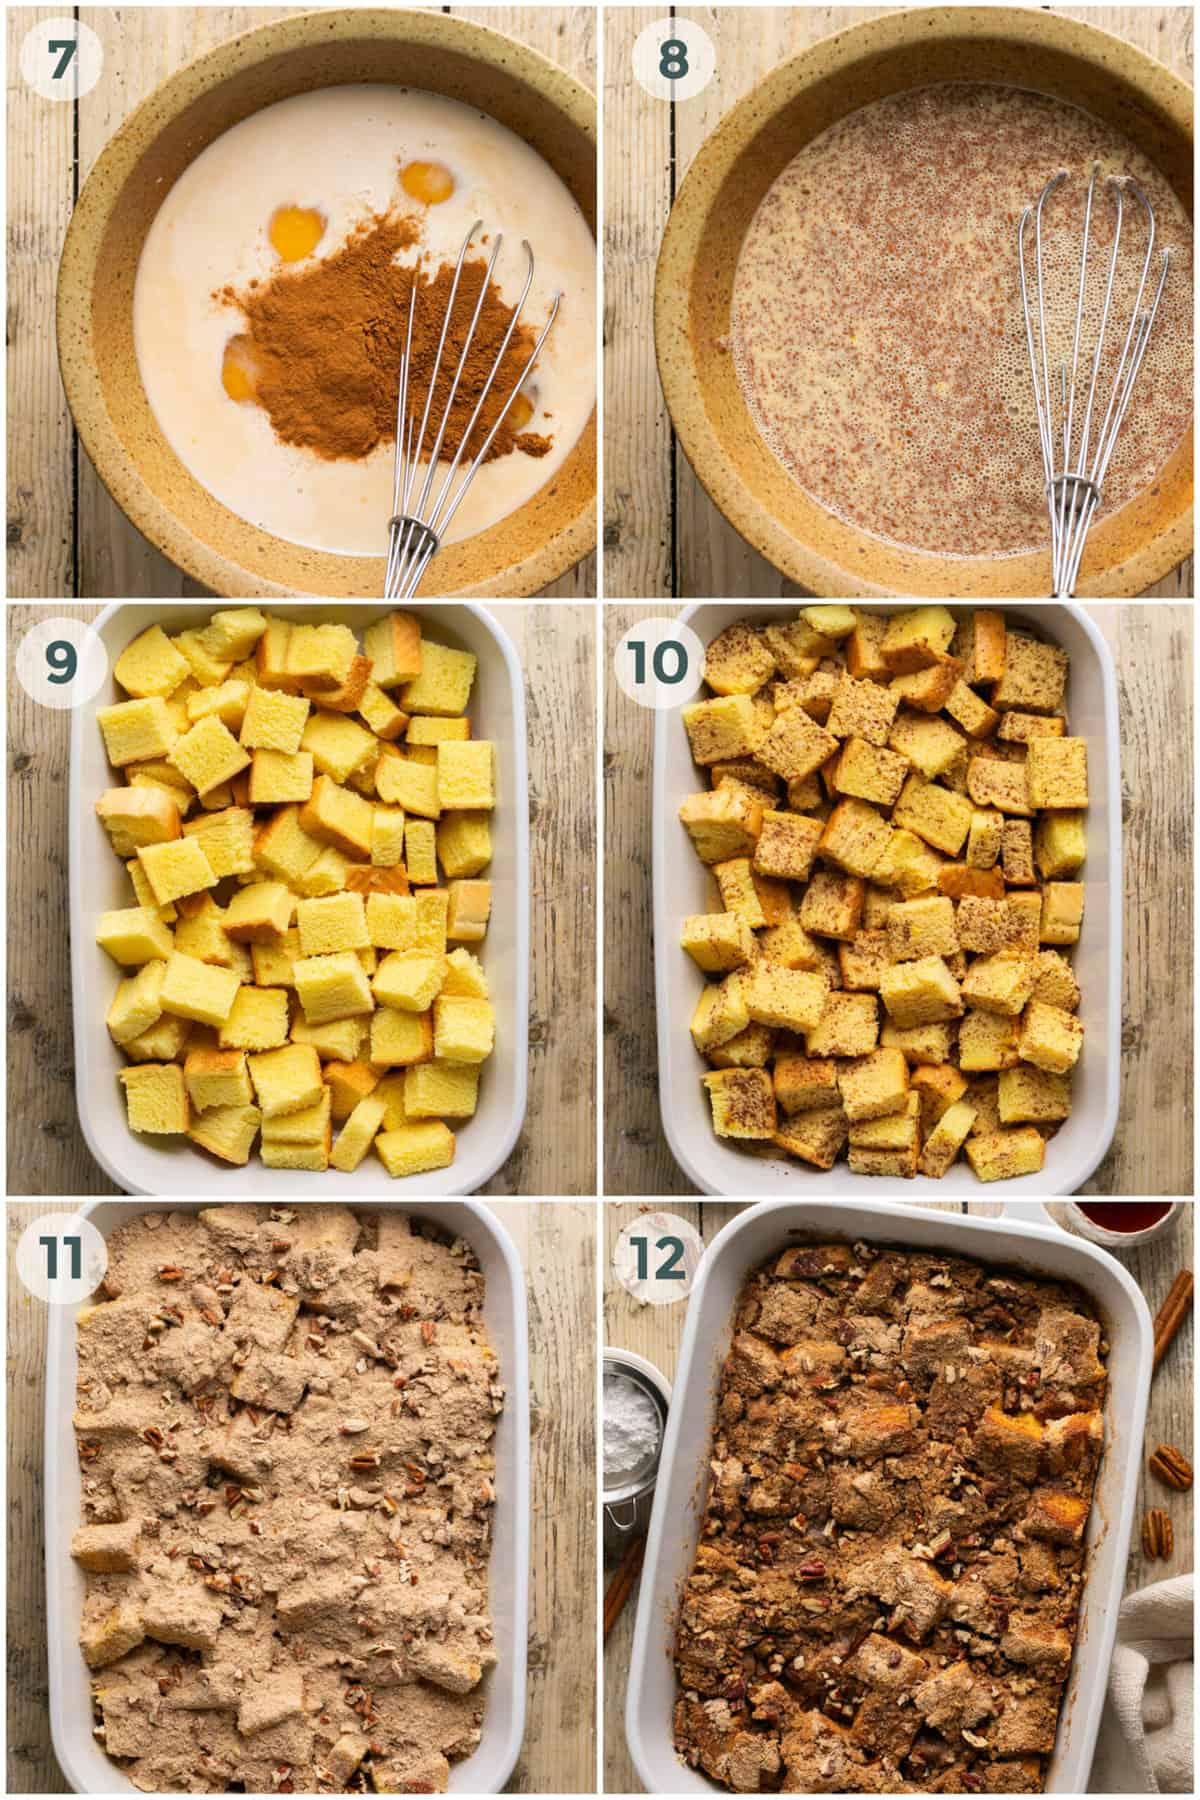 steps 7-12 for preparing overnight french toast casserole